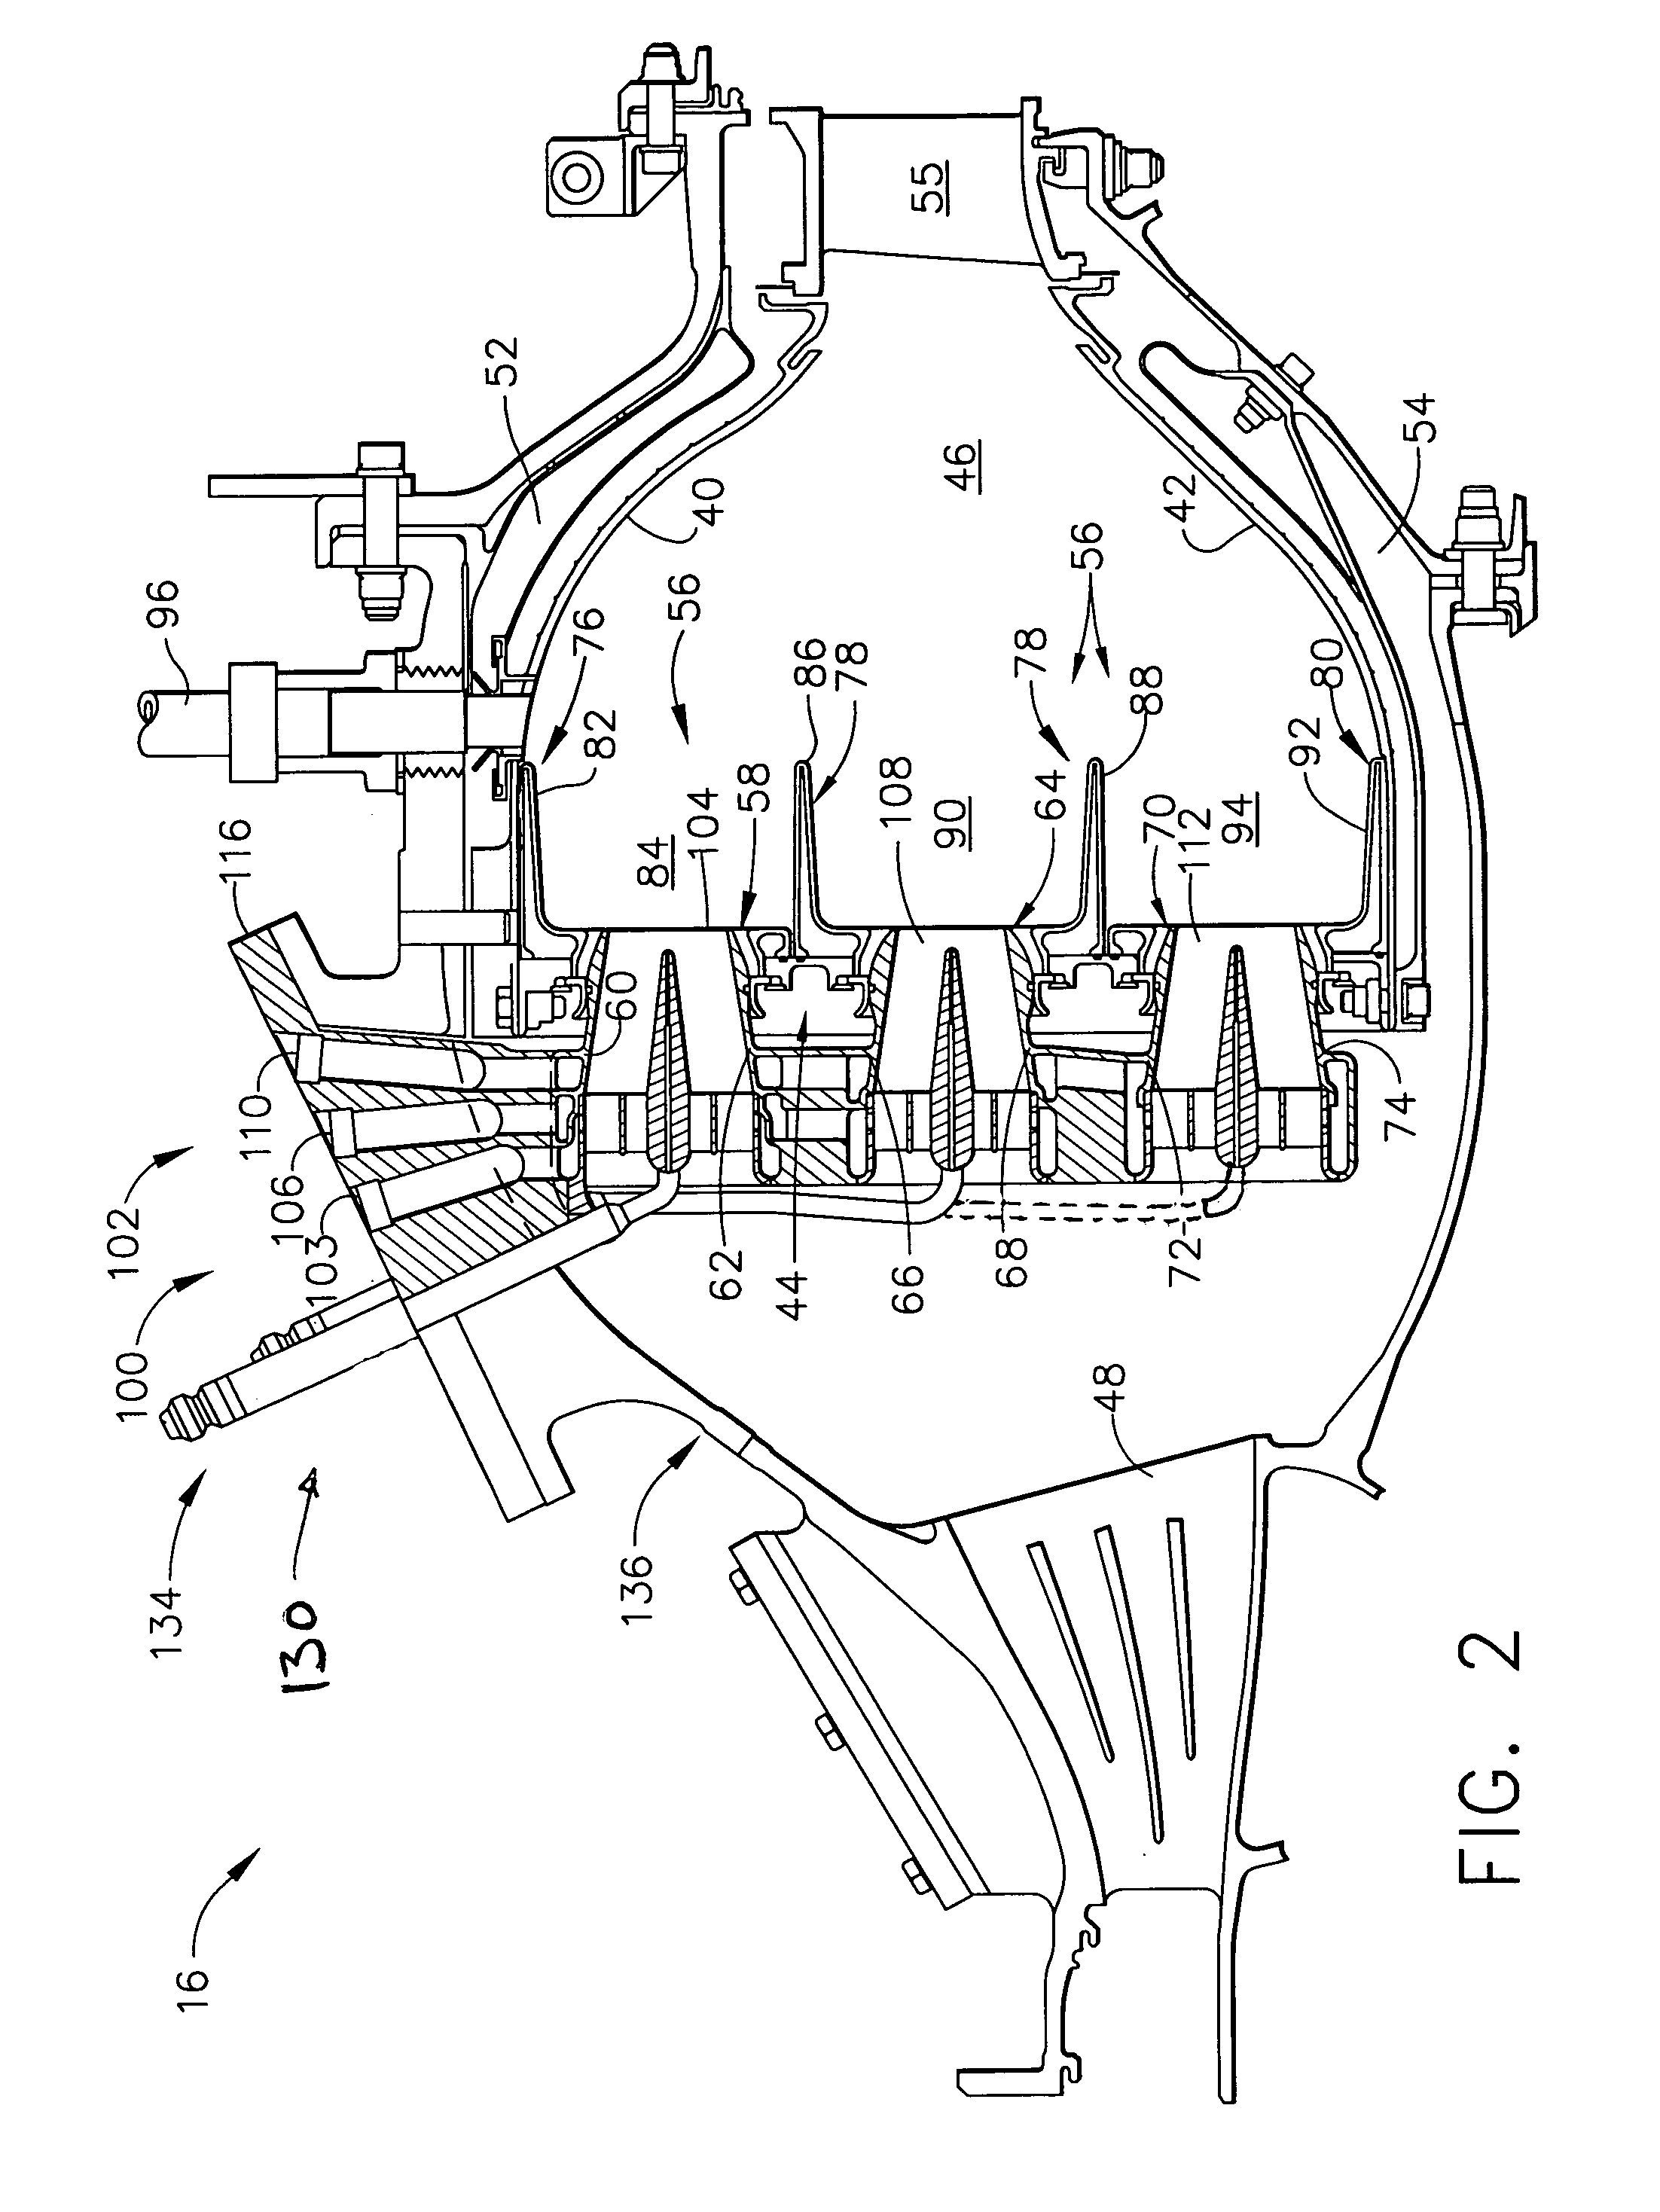 Methods and apparatus for reducing gas turbine engine emissions